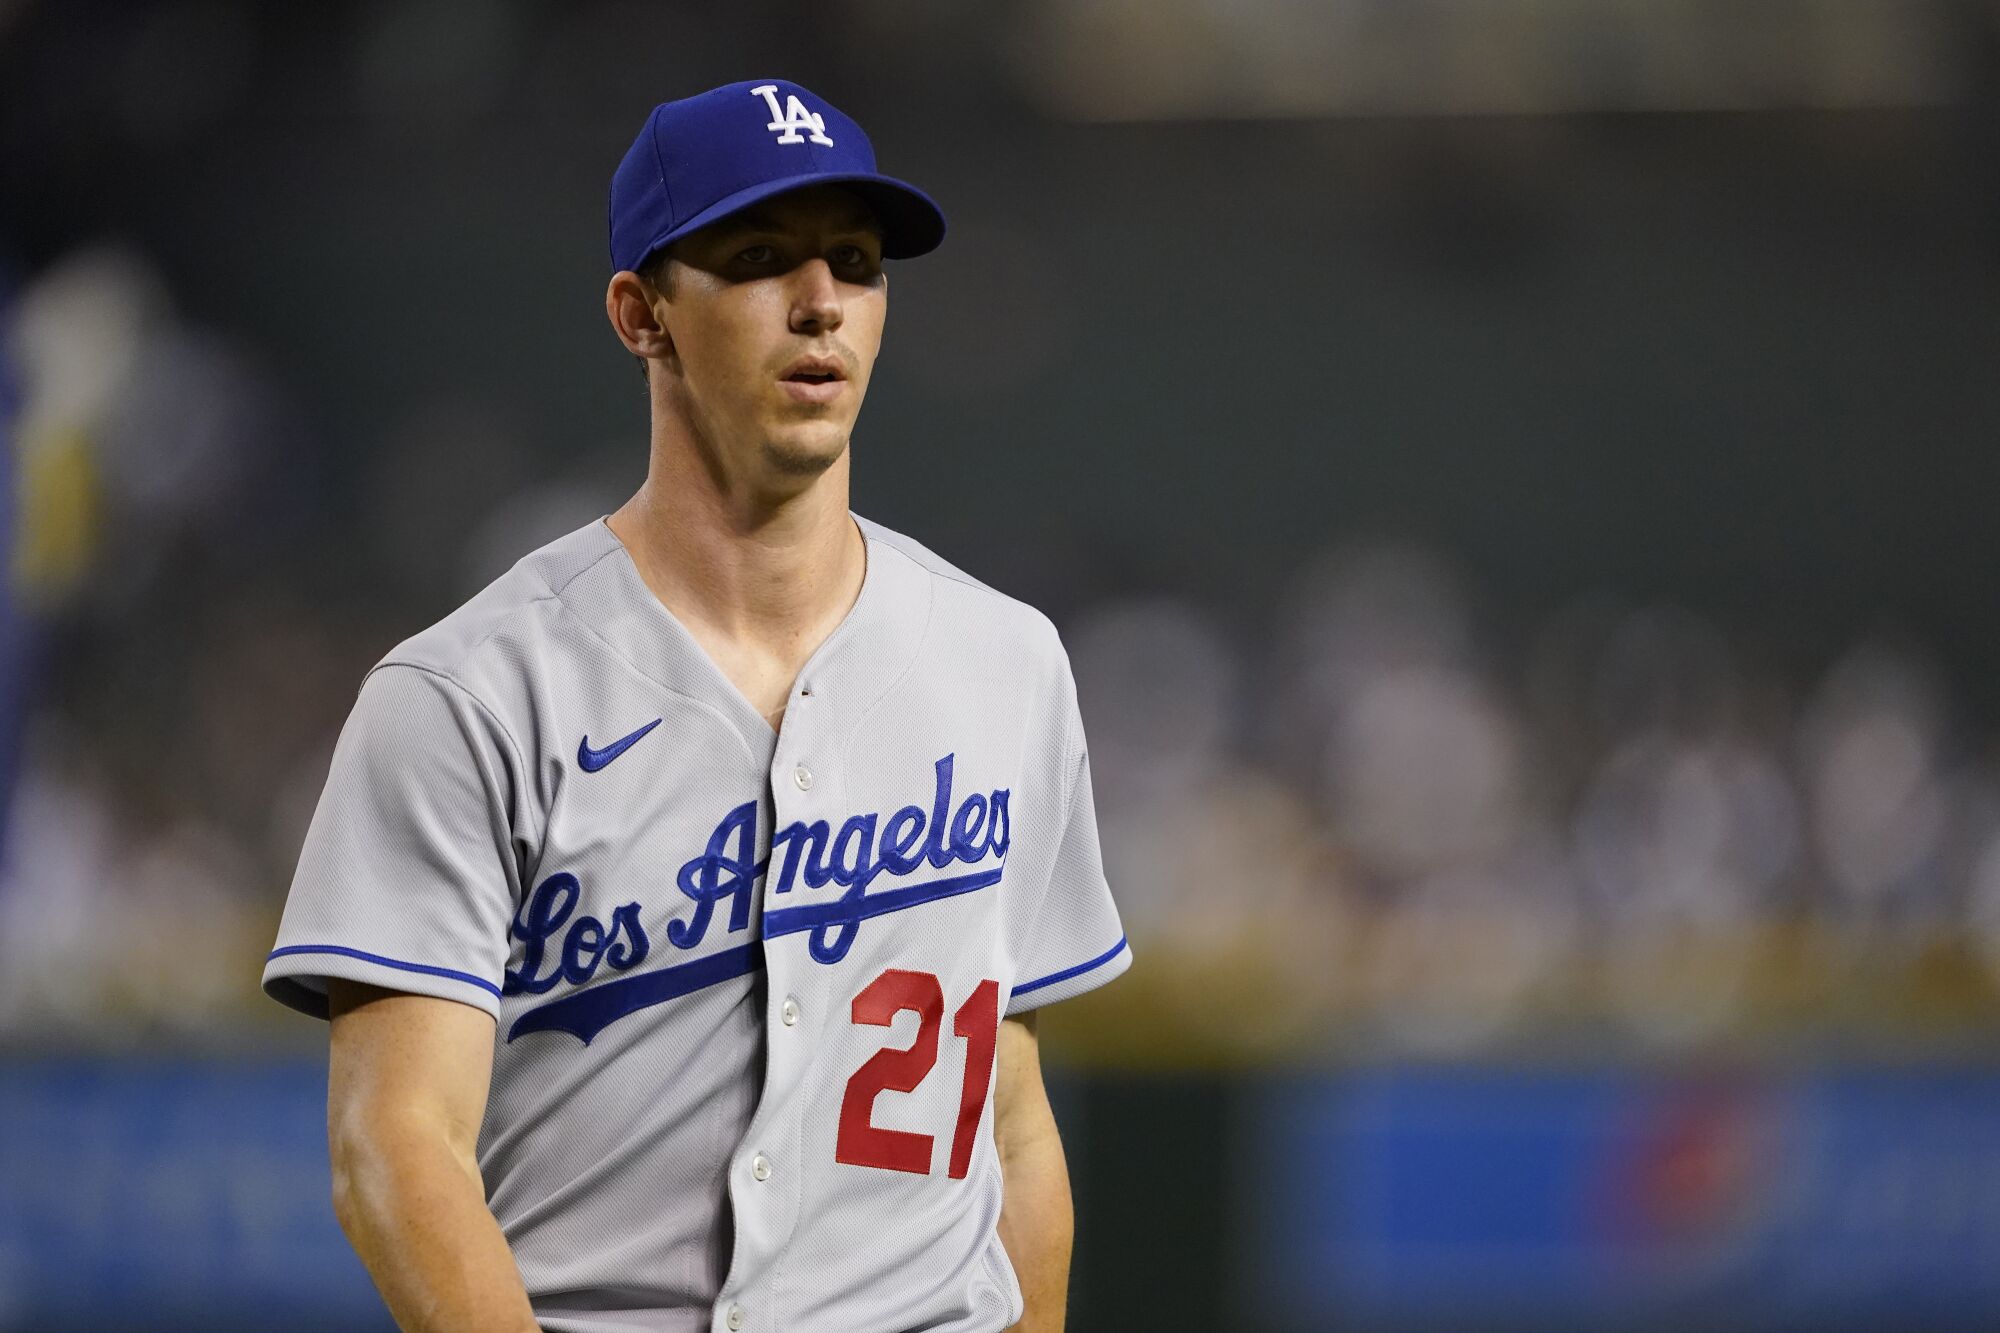 Walker Buehler struck out 10 and gave up only three hits.